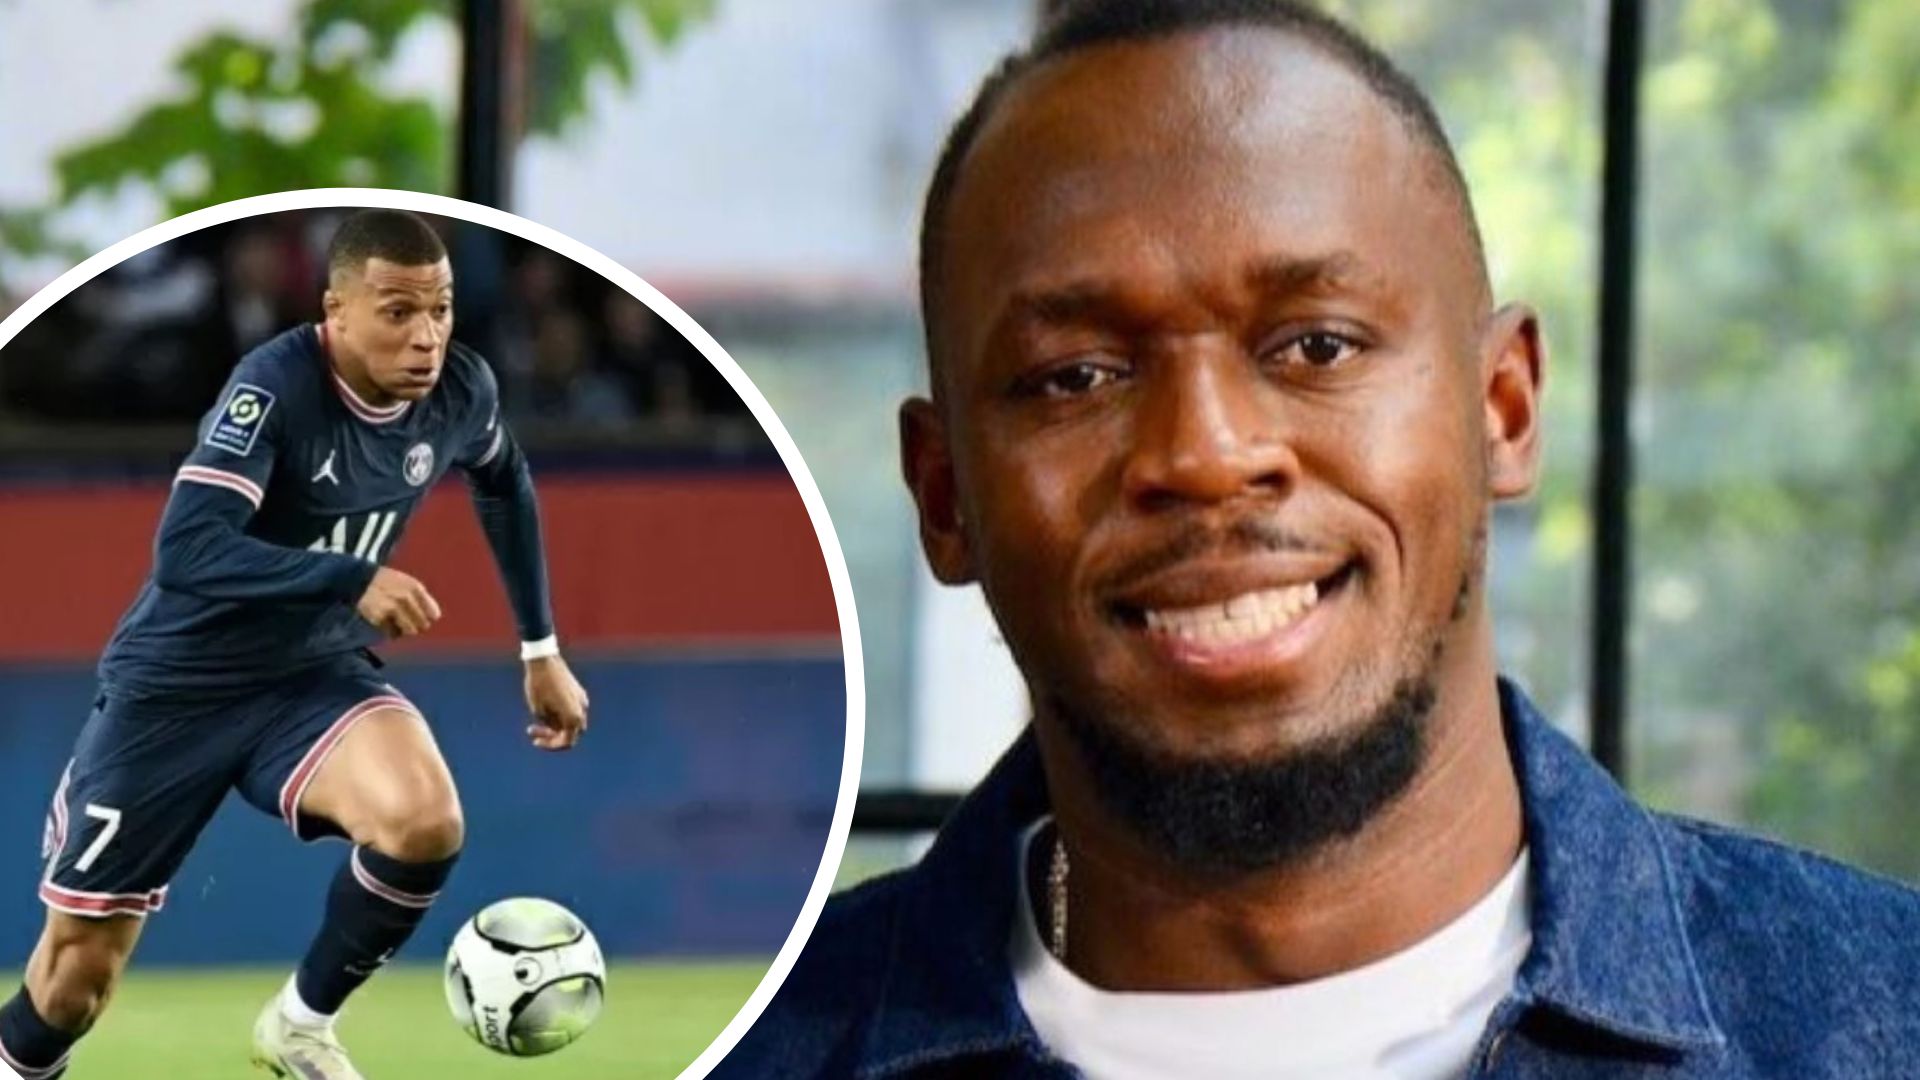 Usain Bolt Reacts to Kylian Mbappe Clocking in One Second Slower than His 100m Record